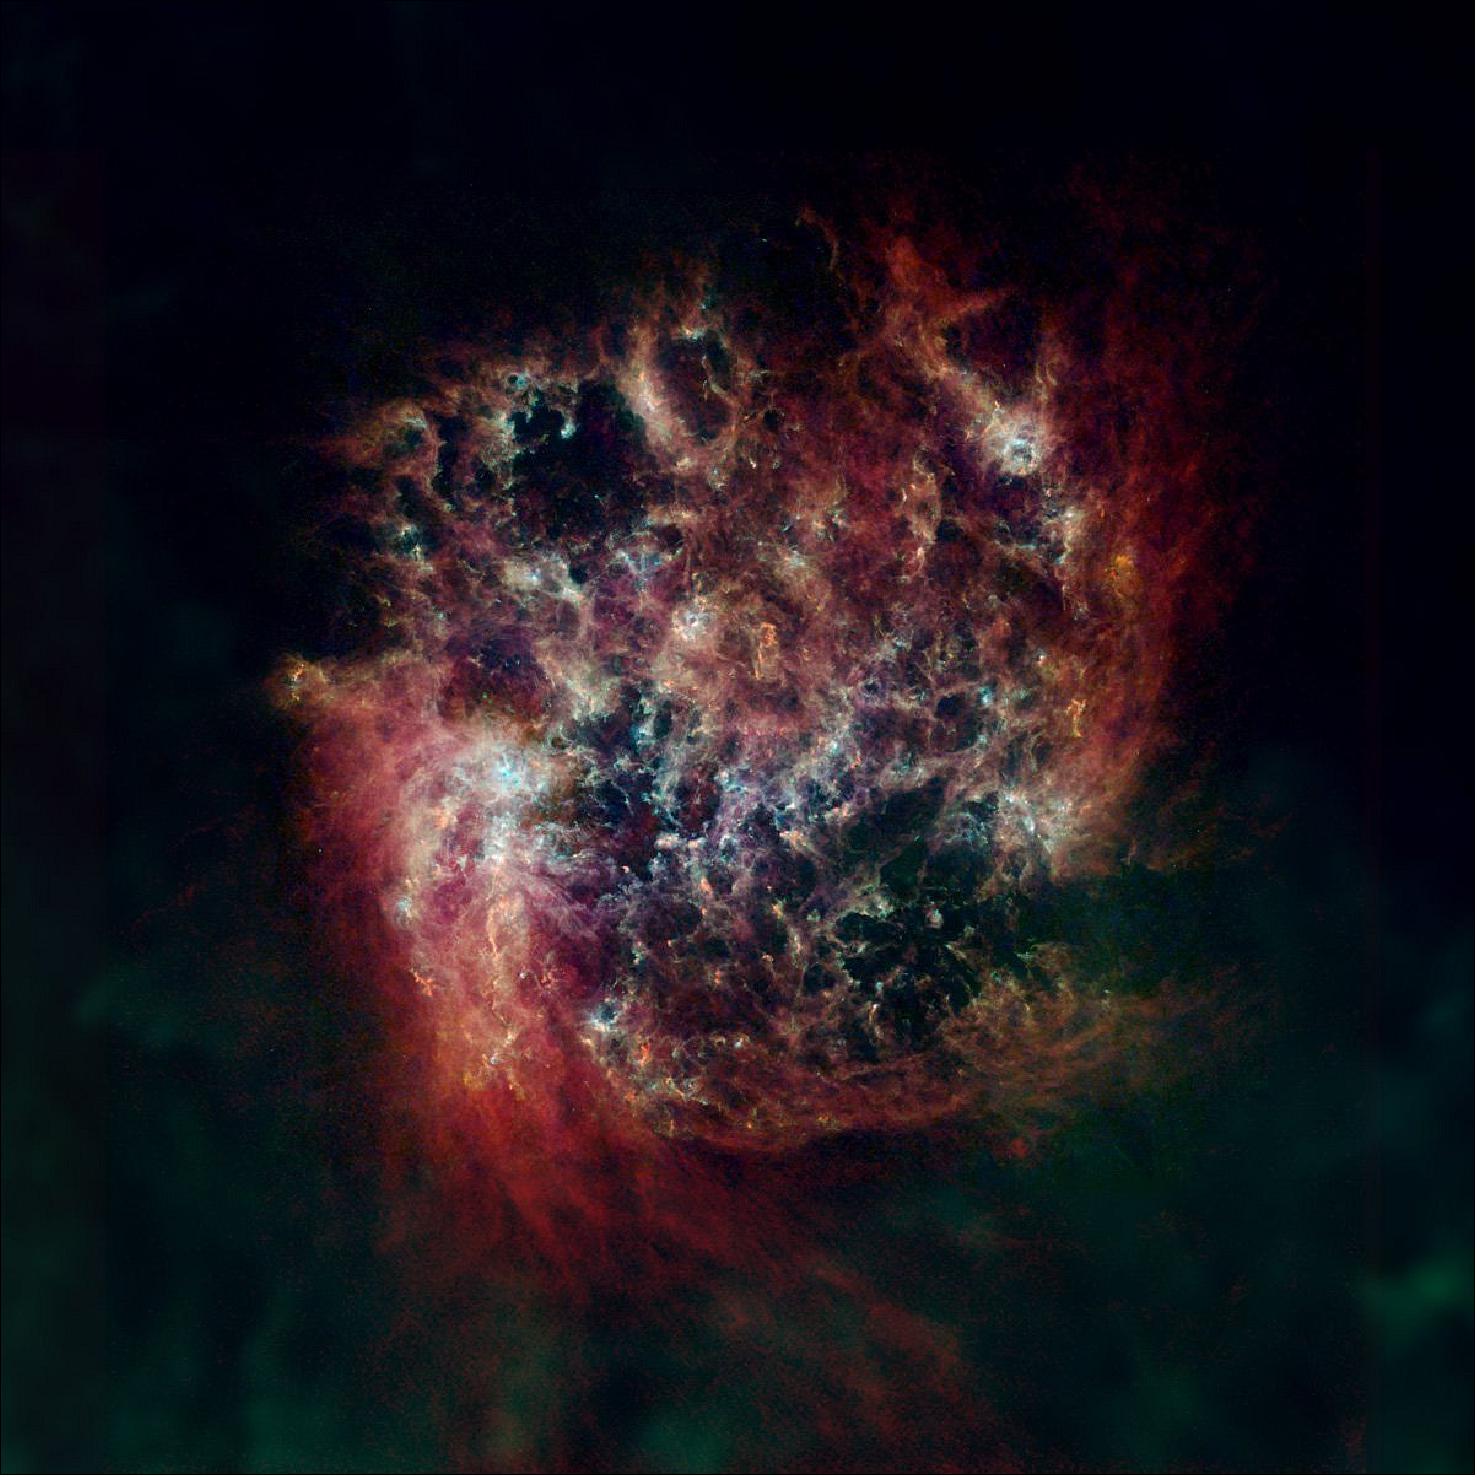 Figure 14: The Large Magellanic Cloud (LMC) is a satellite of the Milky Way, containing about 30 billion stars. Seen here in a far-infrared and radio view, the LMC’s cool and warm dust are shown in green and blue, respectively, with hydrogen gas in red [image credit: ESA/NASA/JPL-Caltech/CSIRO/C. Clark (STScI)]